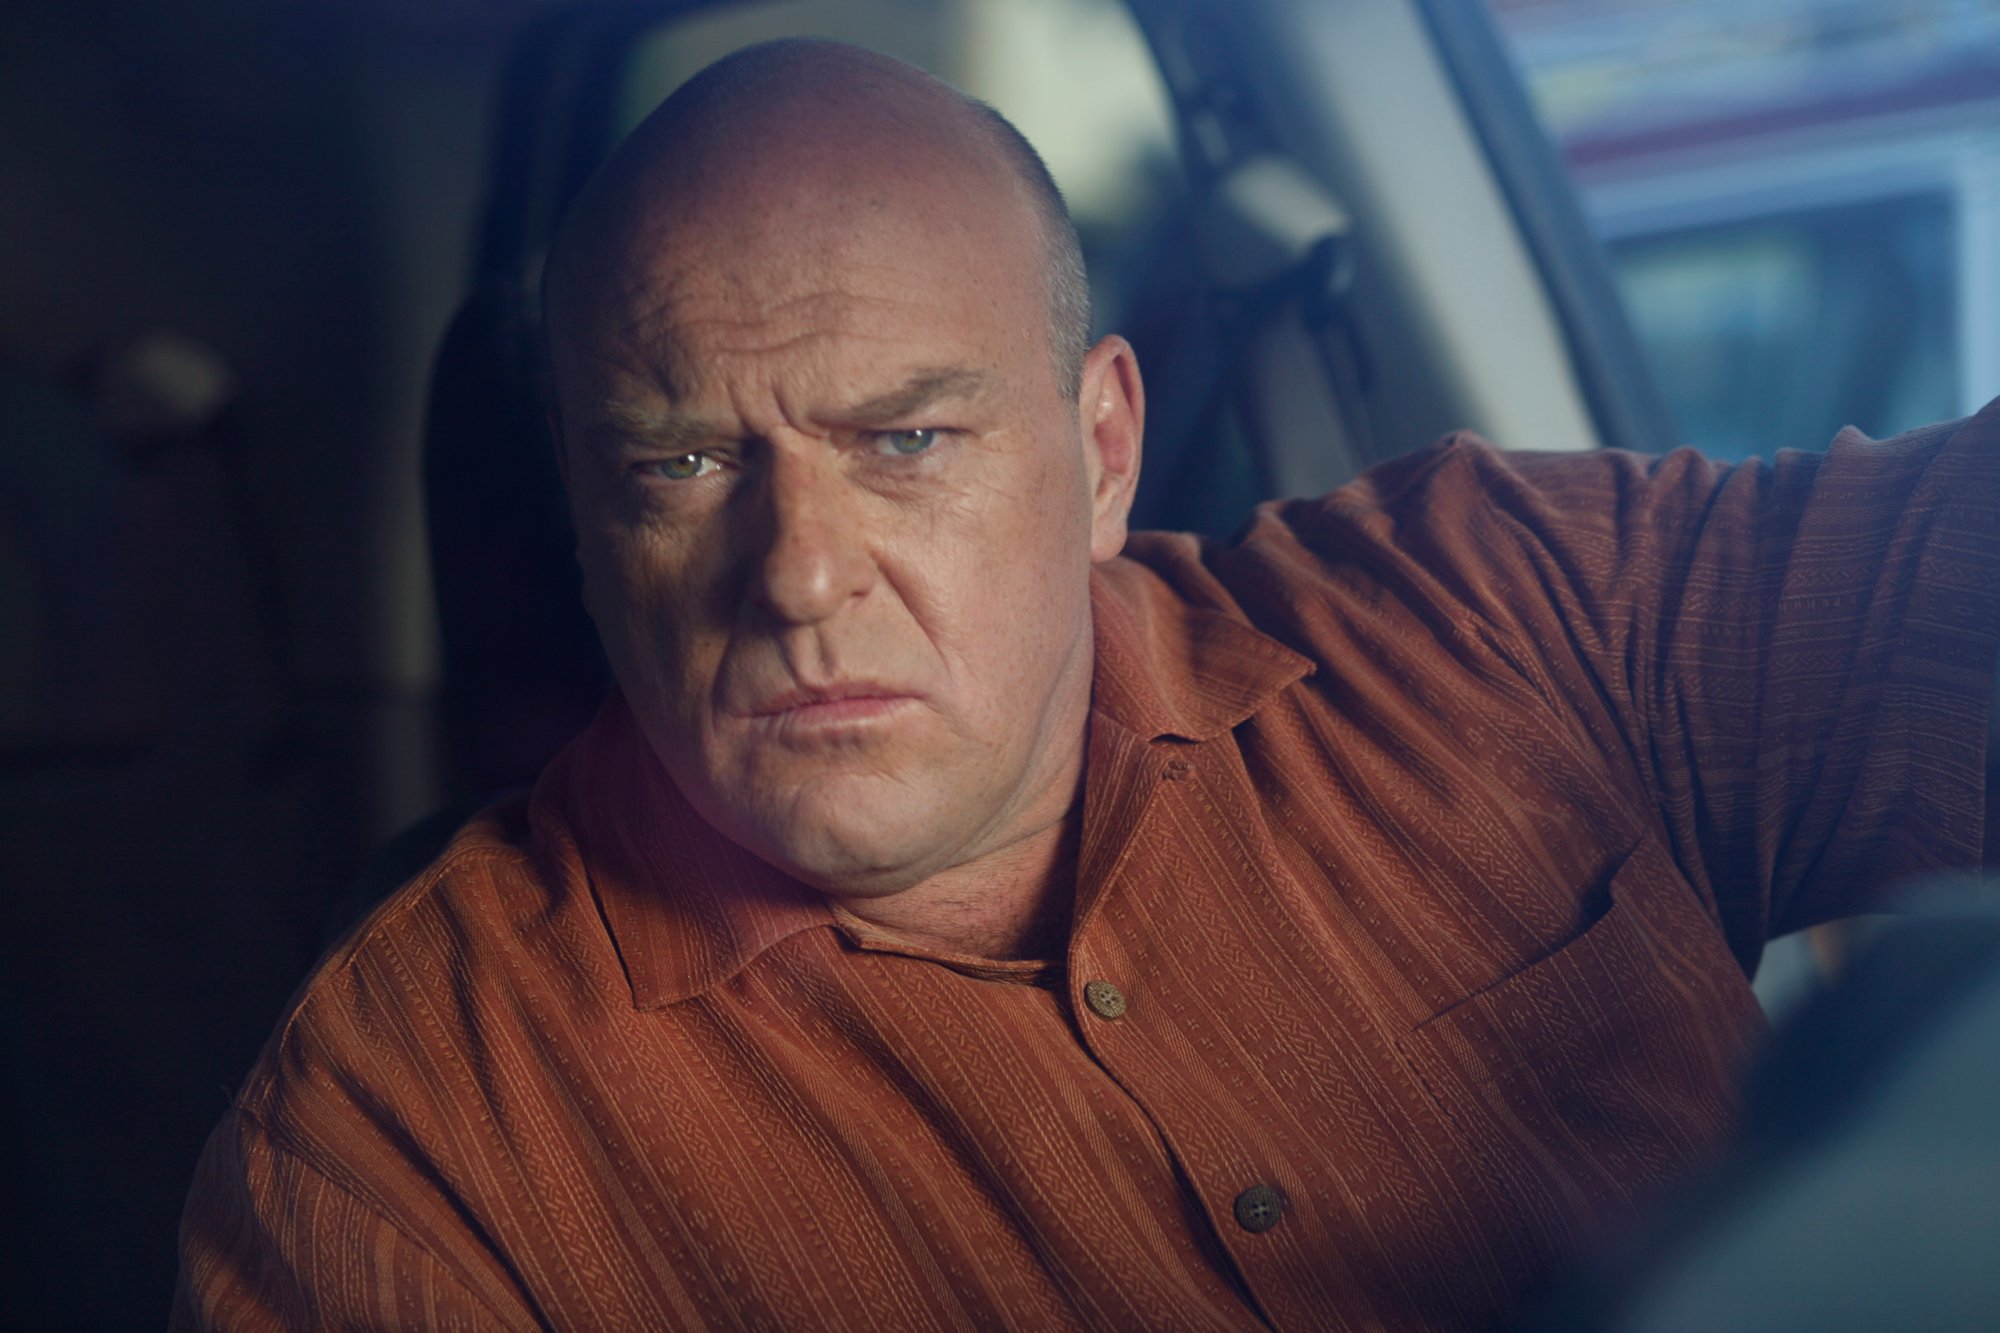 Dean Norris Royalty-Free Images, Stock Photos & Pictures